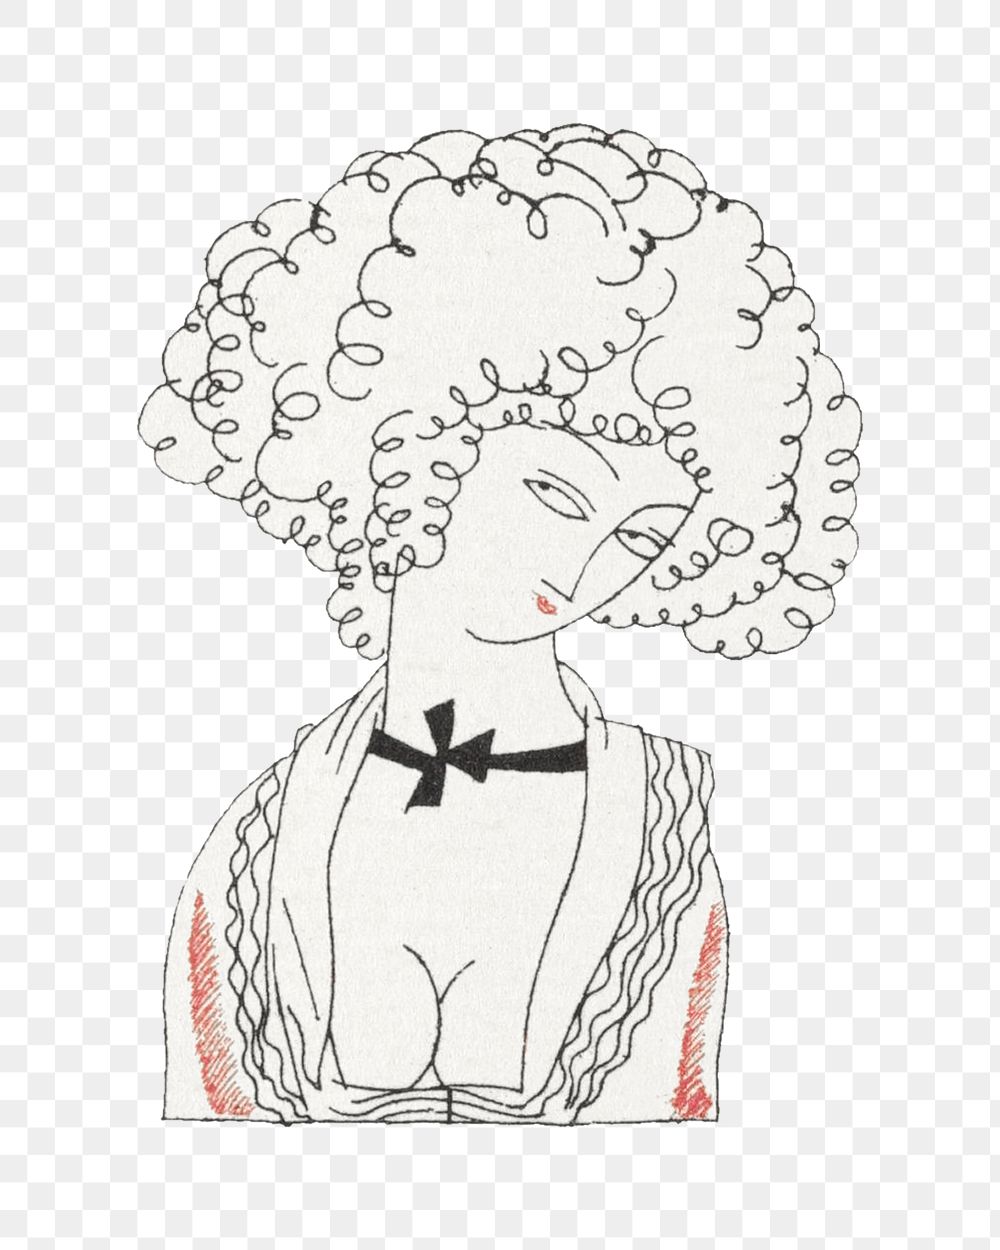 Woman png in fashionable dress illustration, remixed from the artworks by Charles Martin